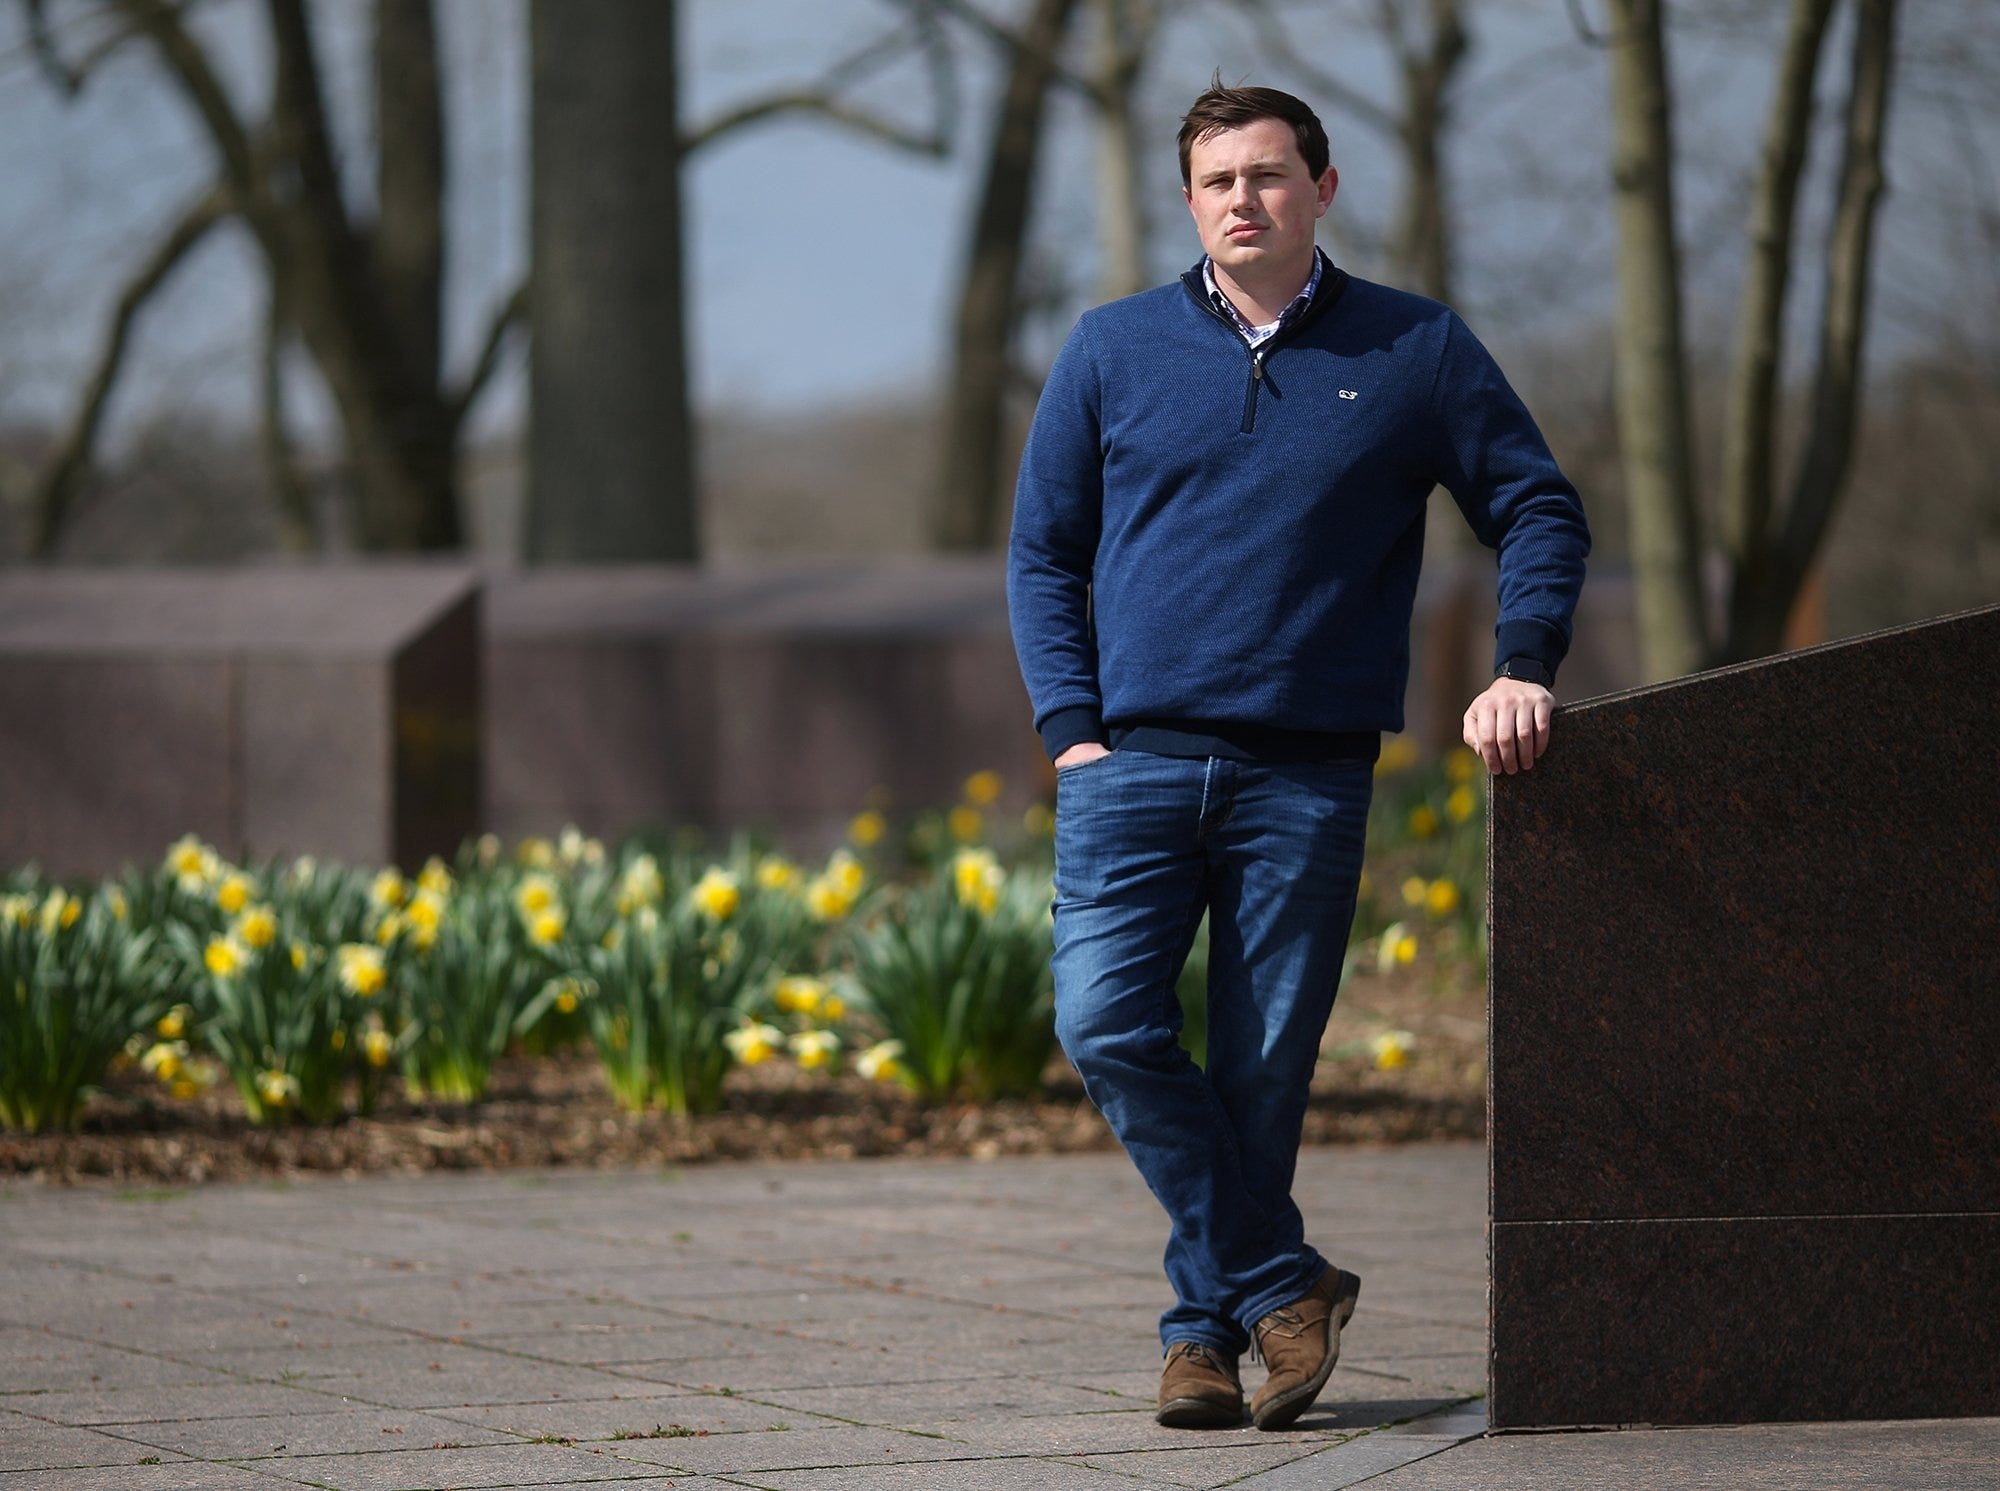 Seth Koellner, president of the Kent State College Republicans, stands in the May 4 Memorial outside Taylor Hall on Thursday, April 16, 2020, in Kent, Ohio.